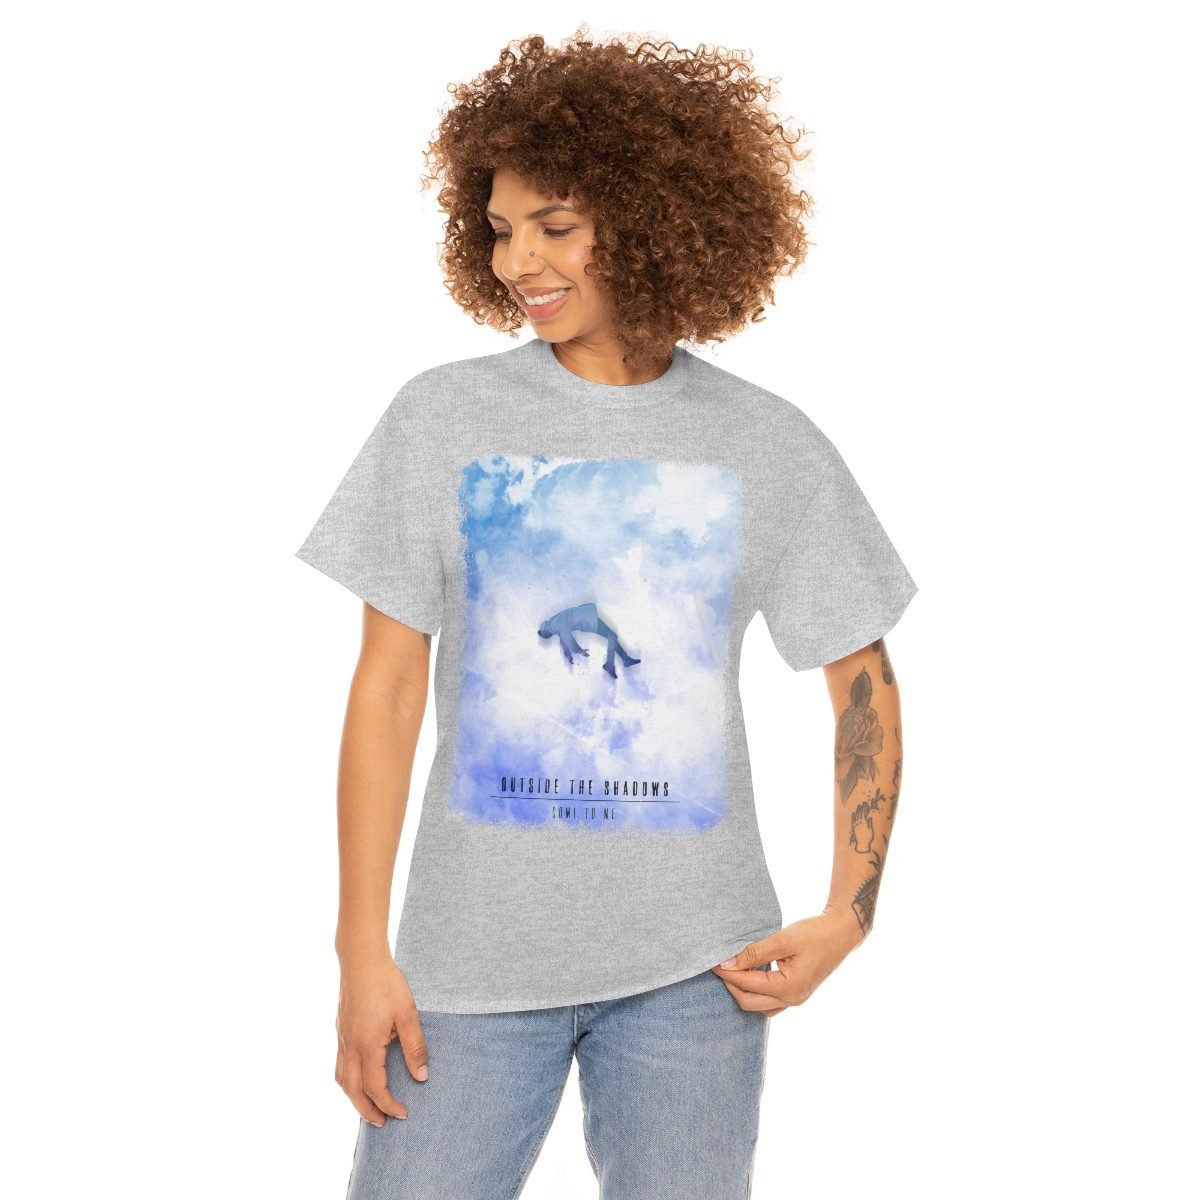 Outside the Shadows – Come To Me BL Short Sleeve Tshirt (5000)